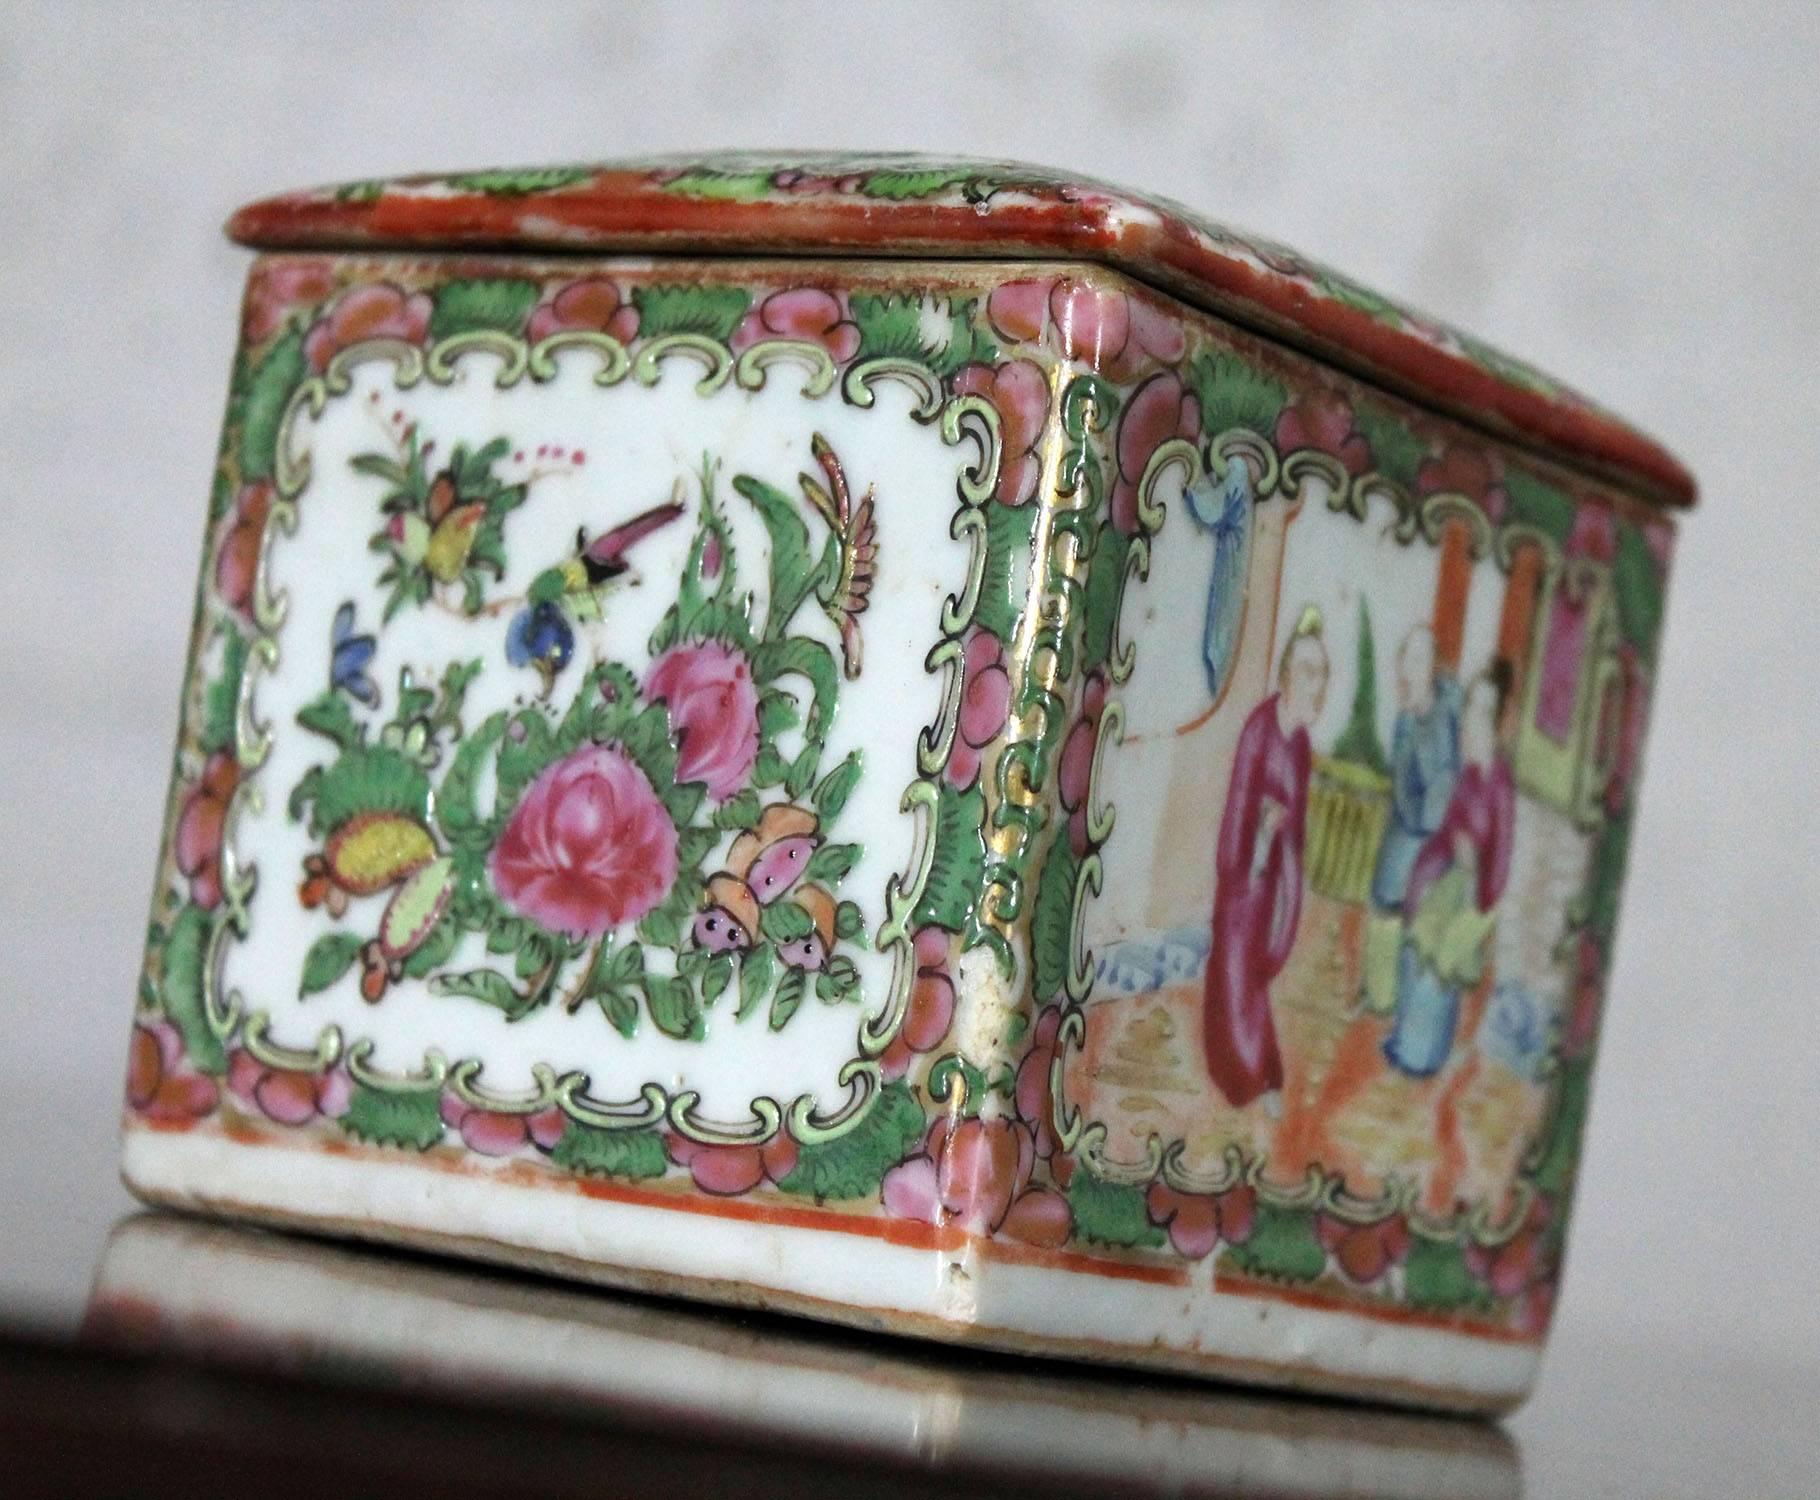 Wonderful and delicate antique Chinese Rose Medallion tea caddy box with lid in the traditional medallion design of village scenes and floral and birds. Qing dynasty, circa 1850-1890 and in wonderful antique condition. The hand-painting is worn in